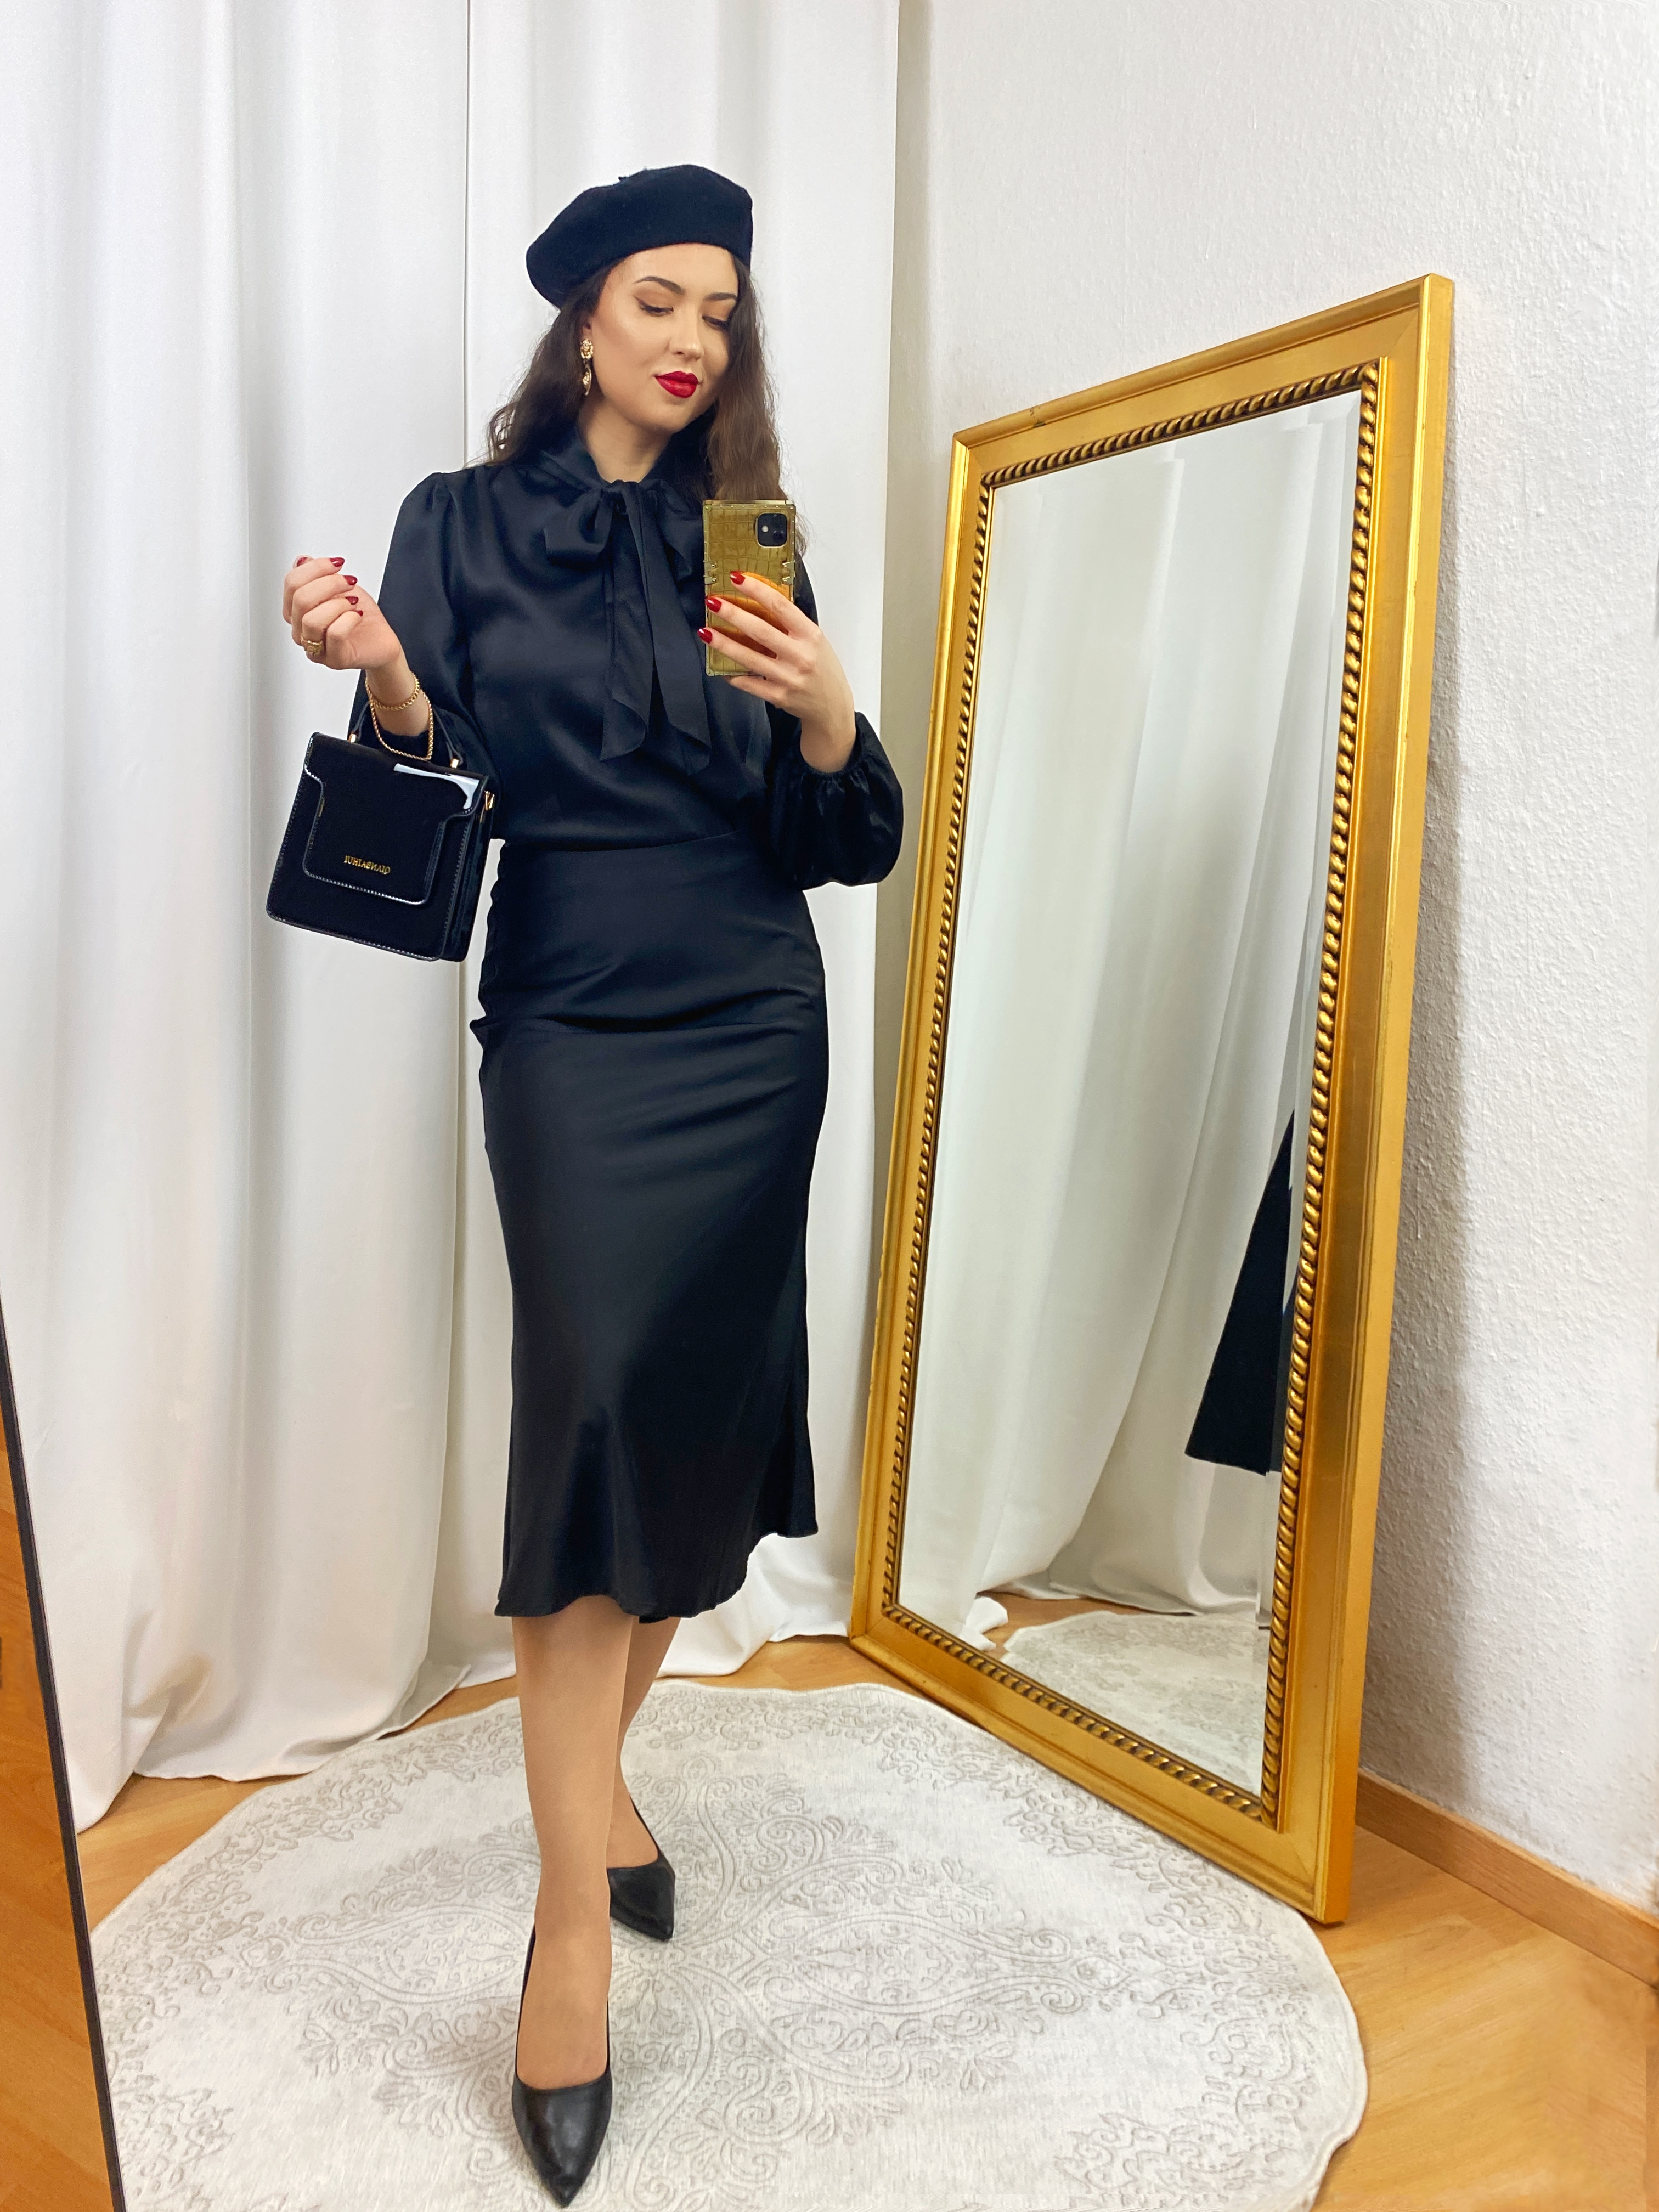 Black Satin Skirt Outfit Ideas You Can Copy